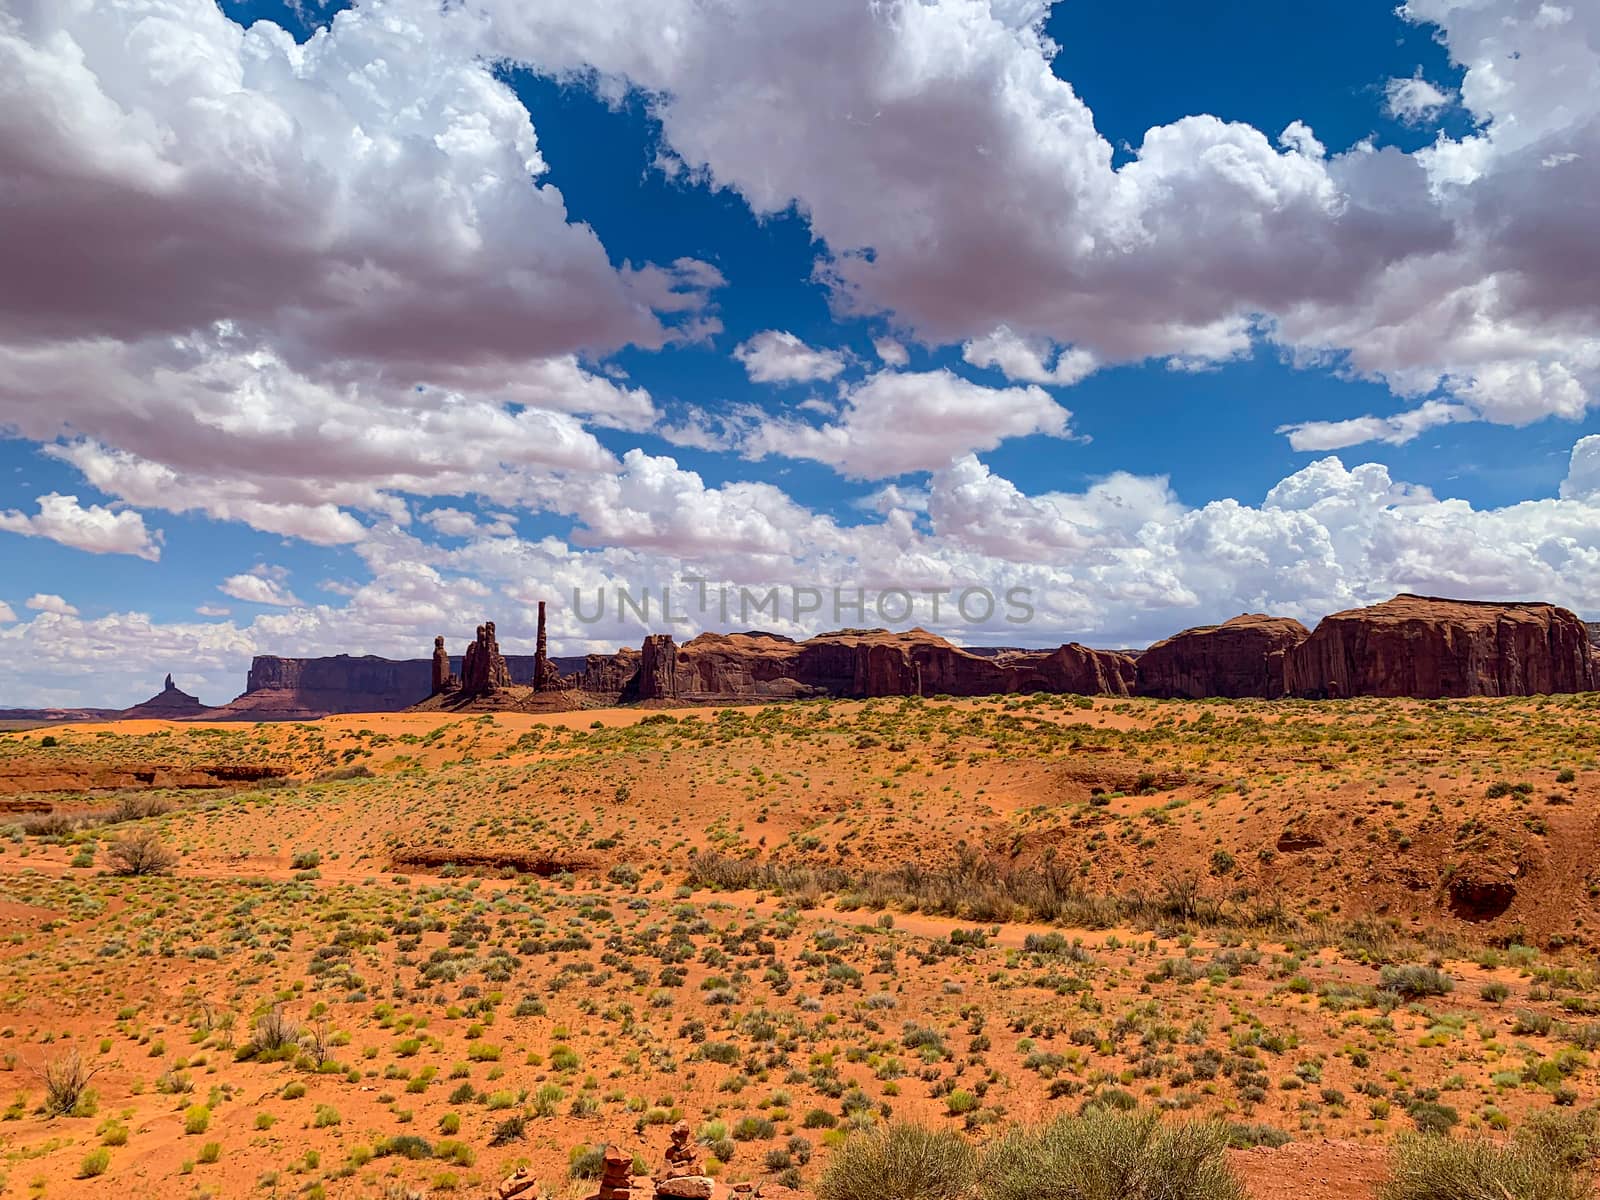 Monument Valley on the border between Arizona and Utah, USA